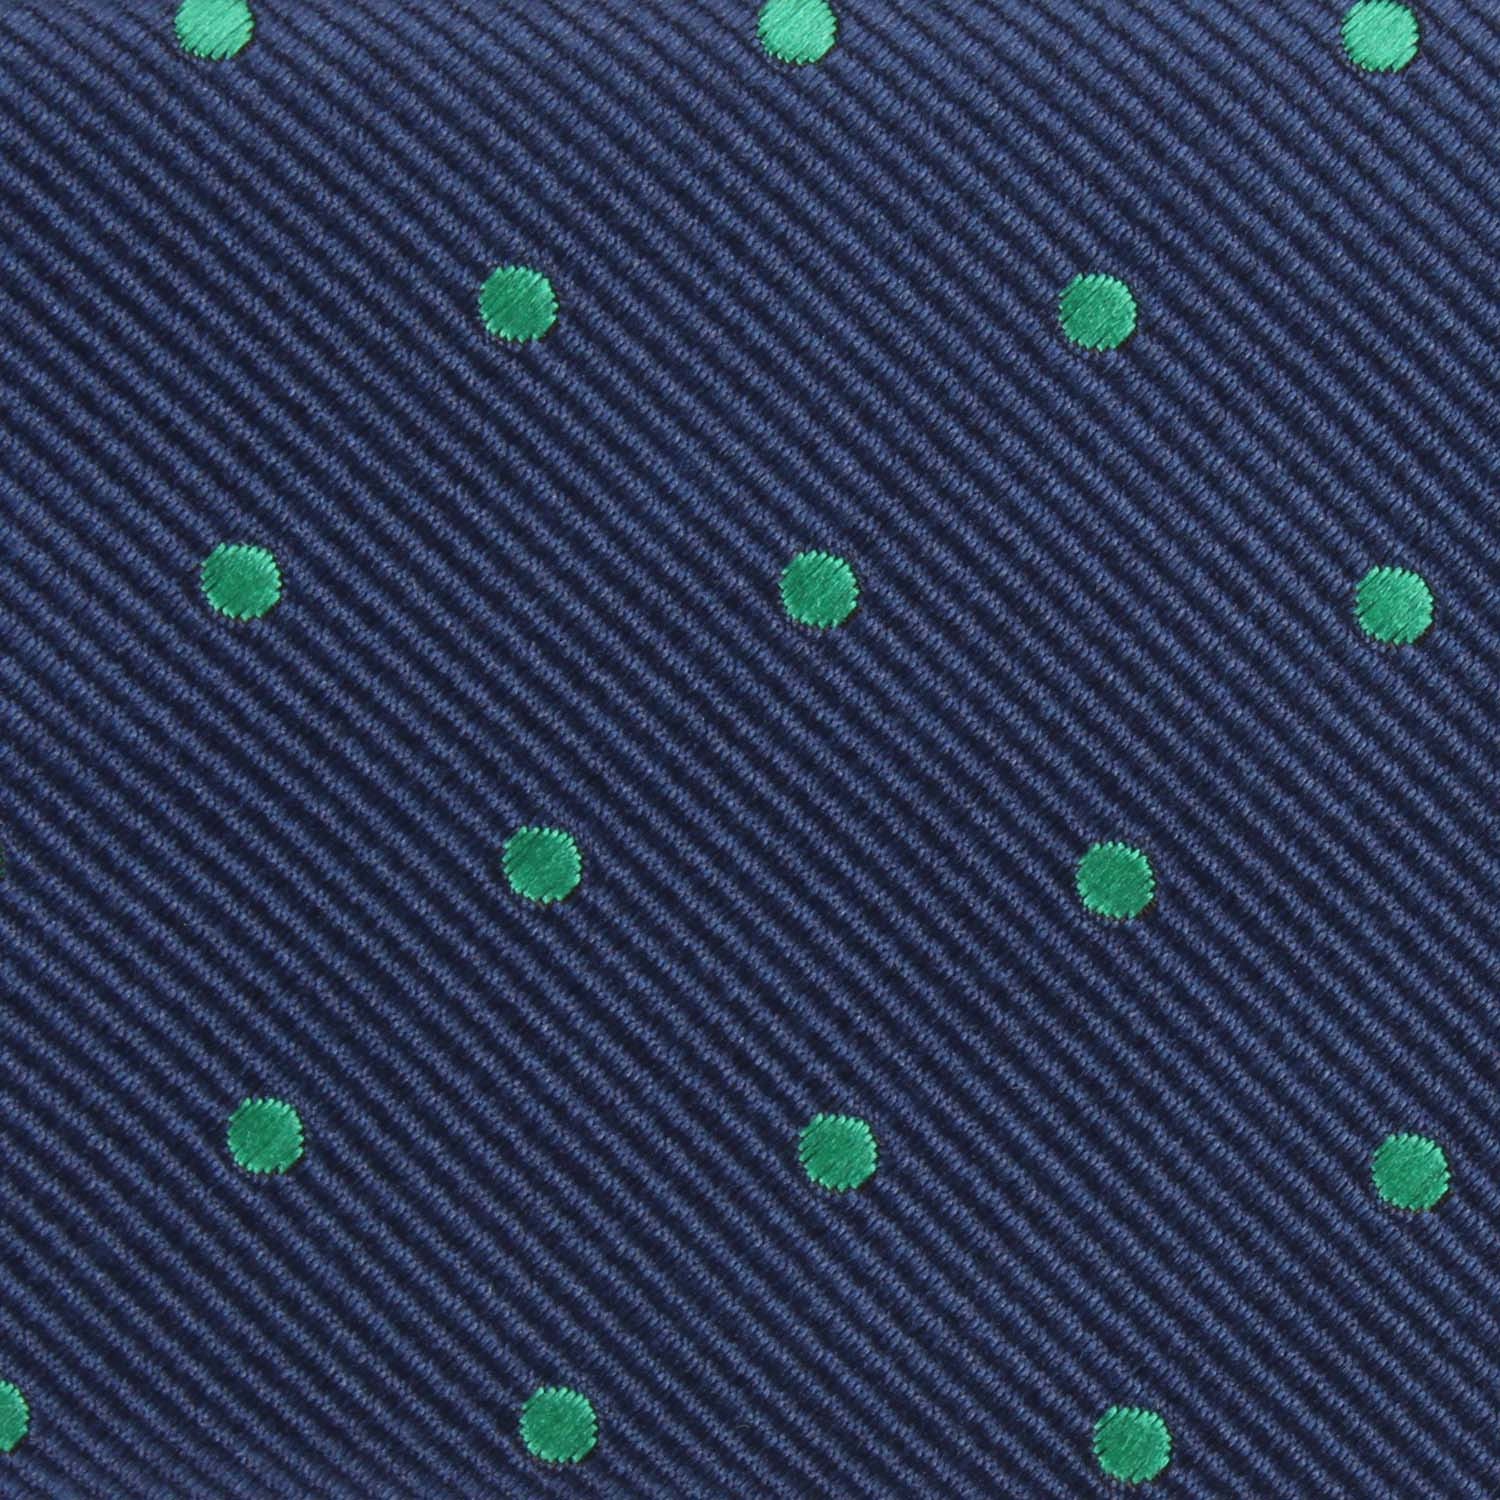 Navy Blue with Green Polka Dots Fabric Kids Bow Tie M130